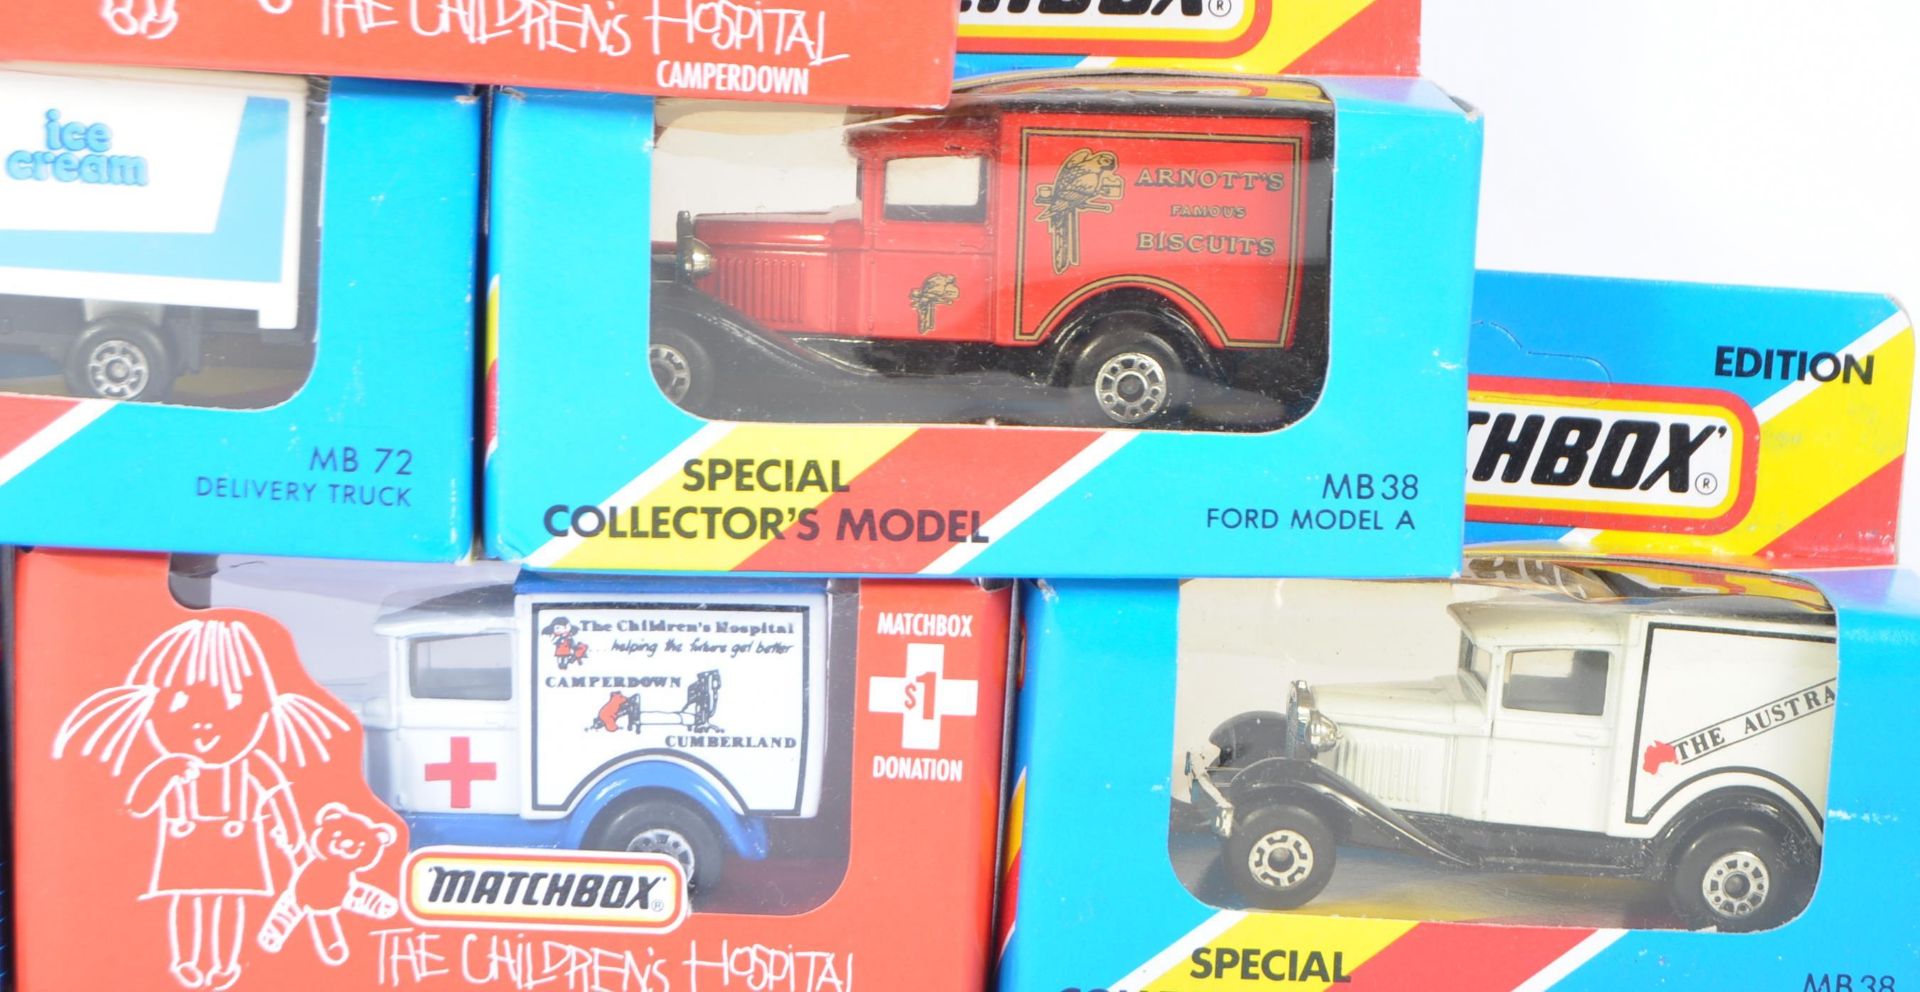 COLLECTION OF X10 VINTAGE MATCHBOX DIECAST MODEL CARS - Image 4 of 6